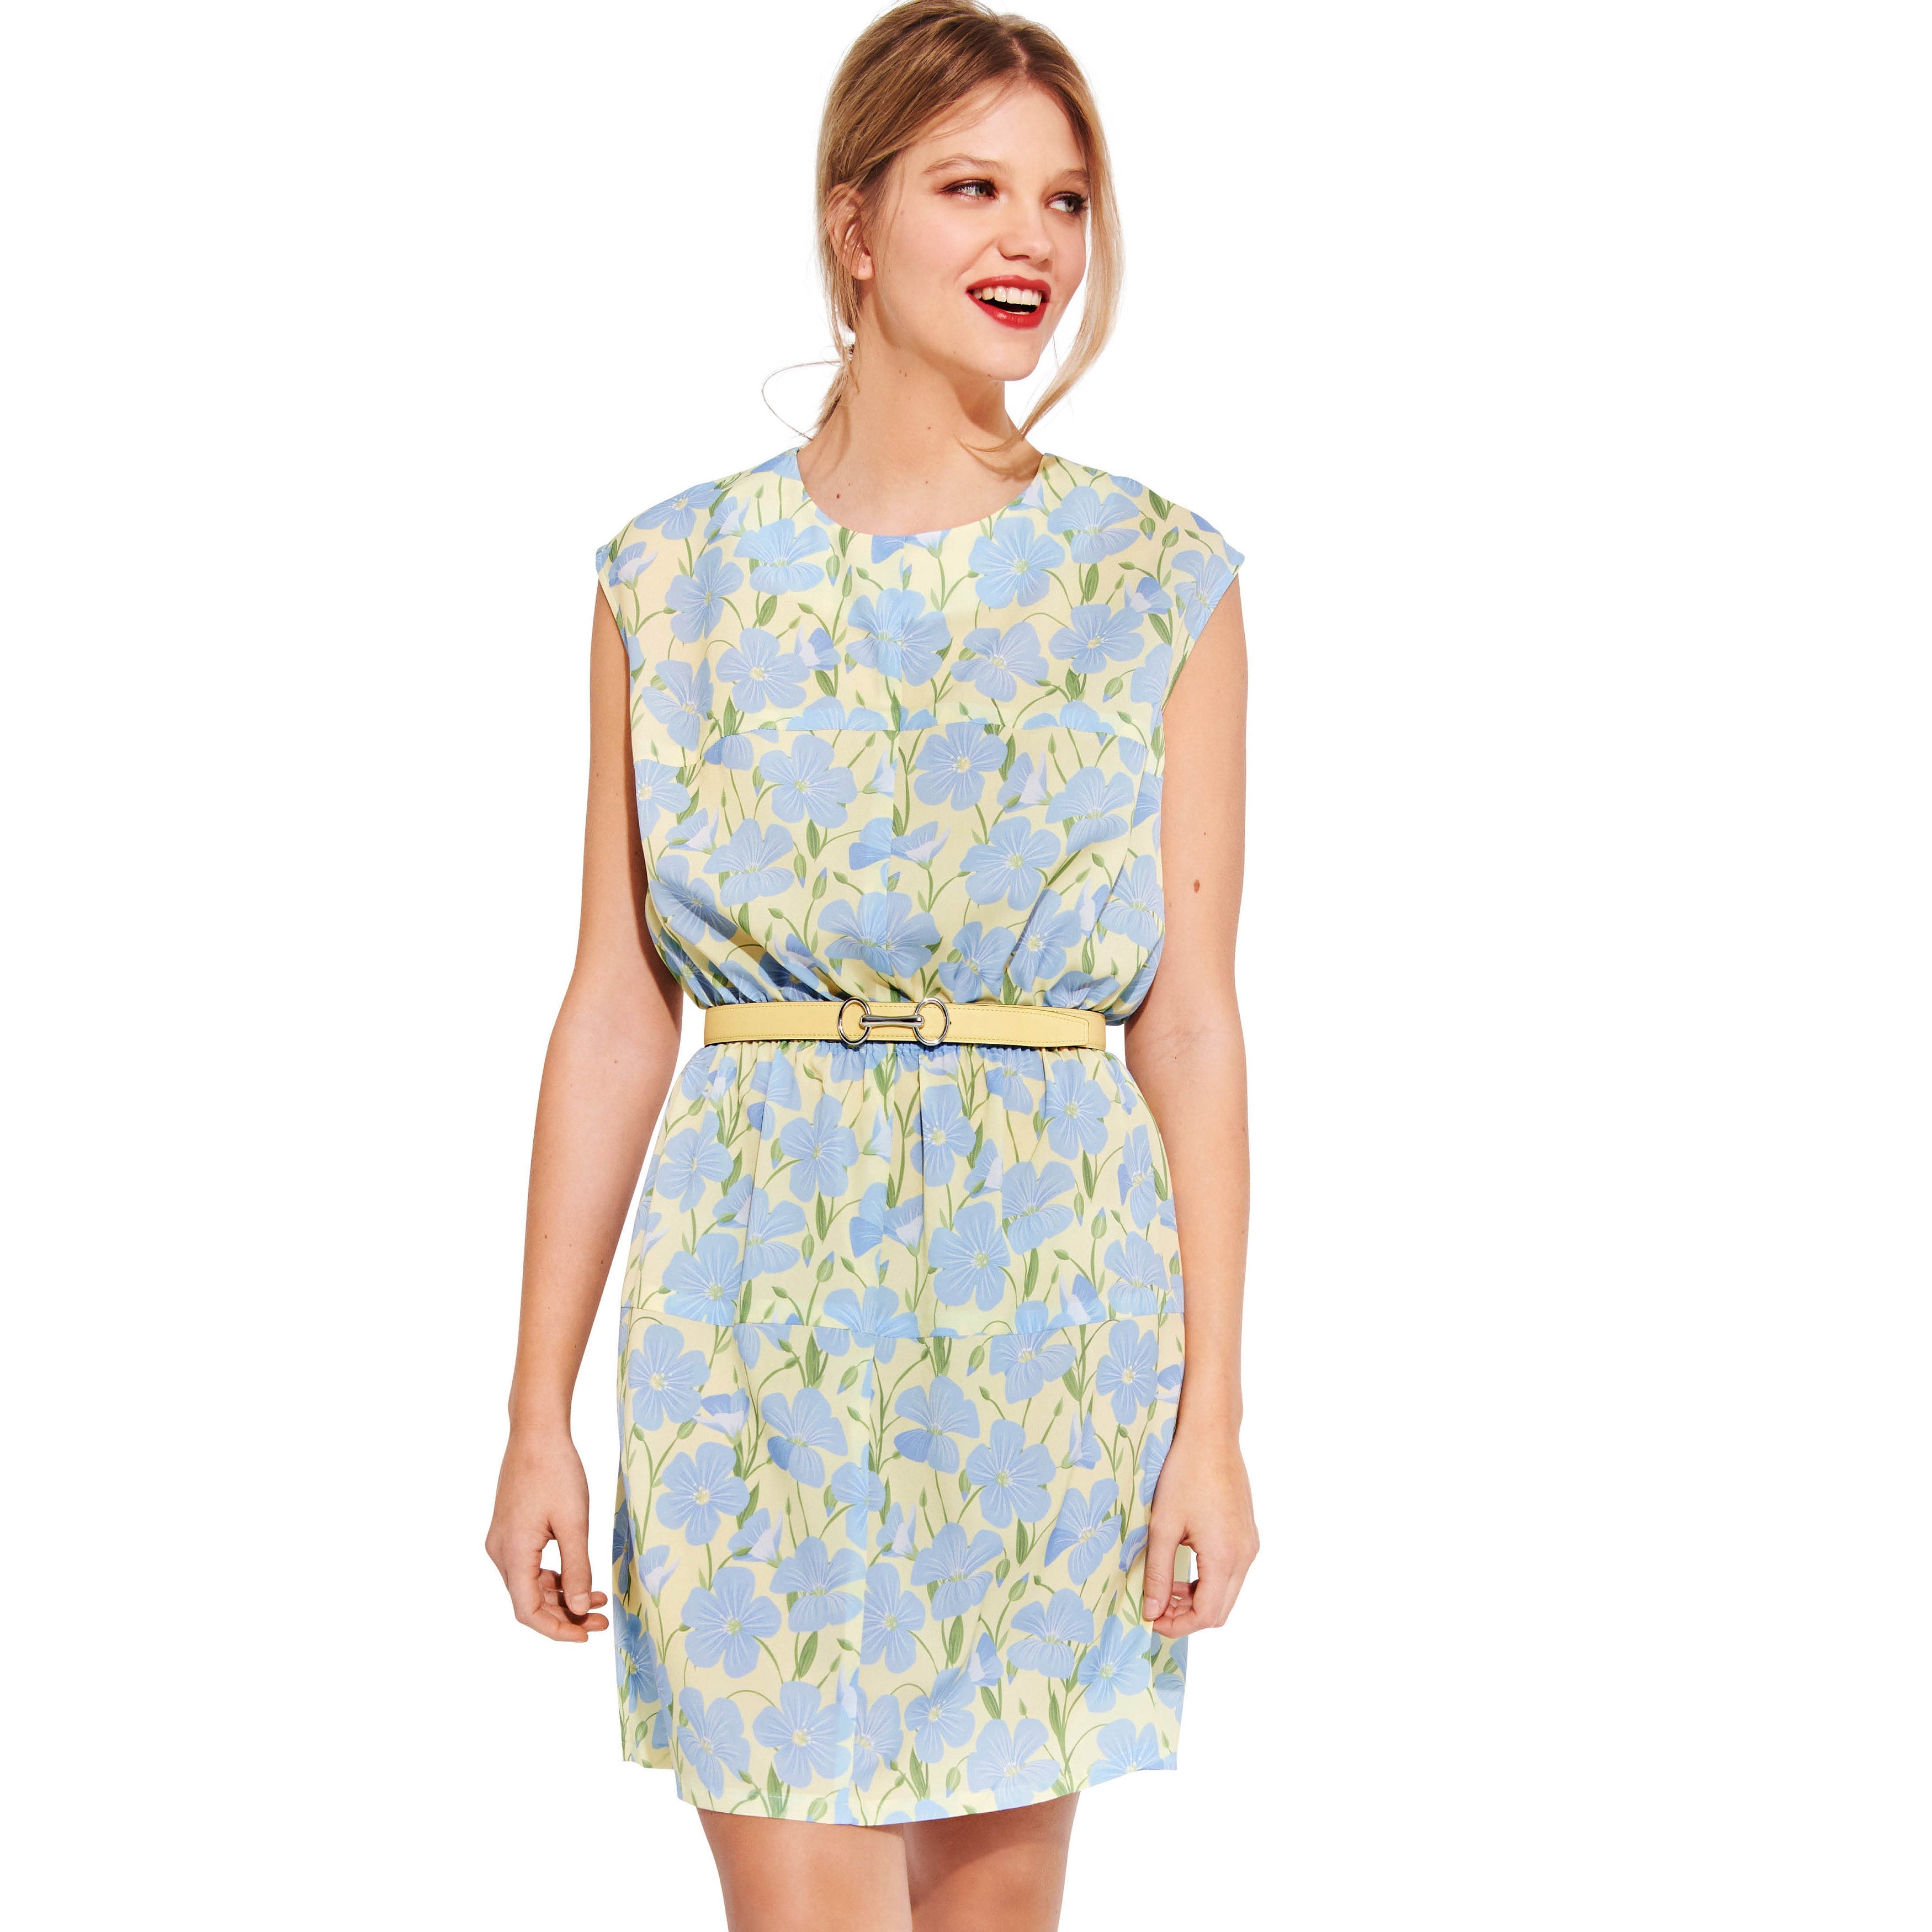 Burda Style Pattern 6009 EASY Dress from Jaycotts Sewing Supplies